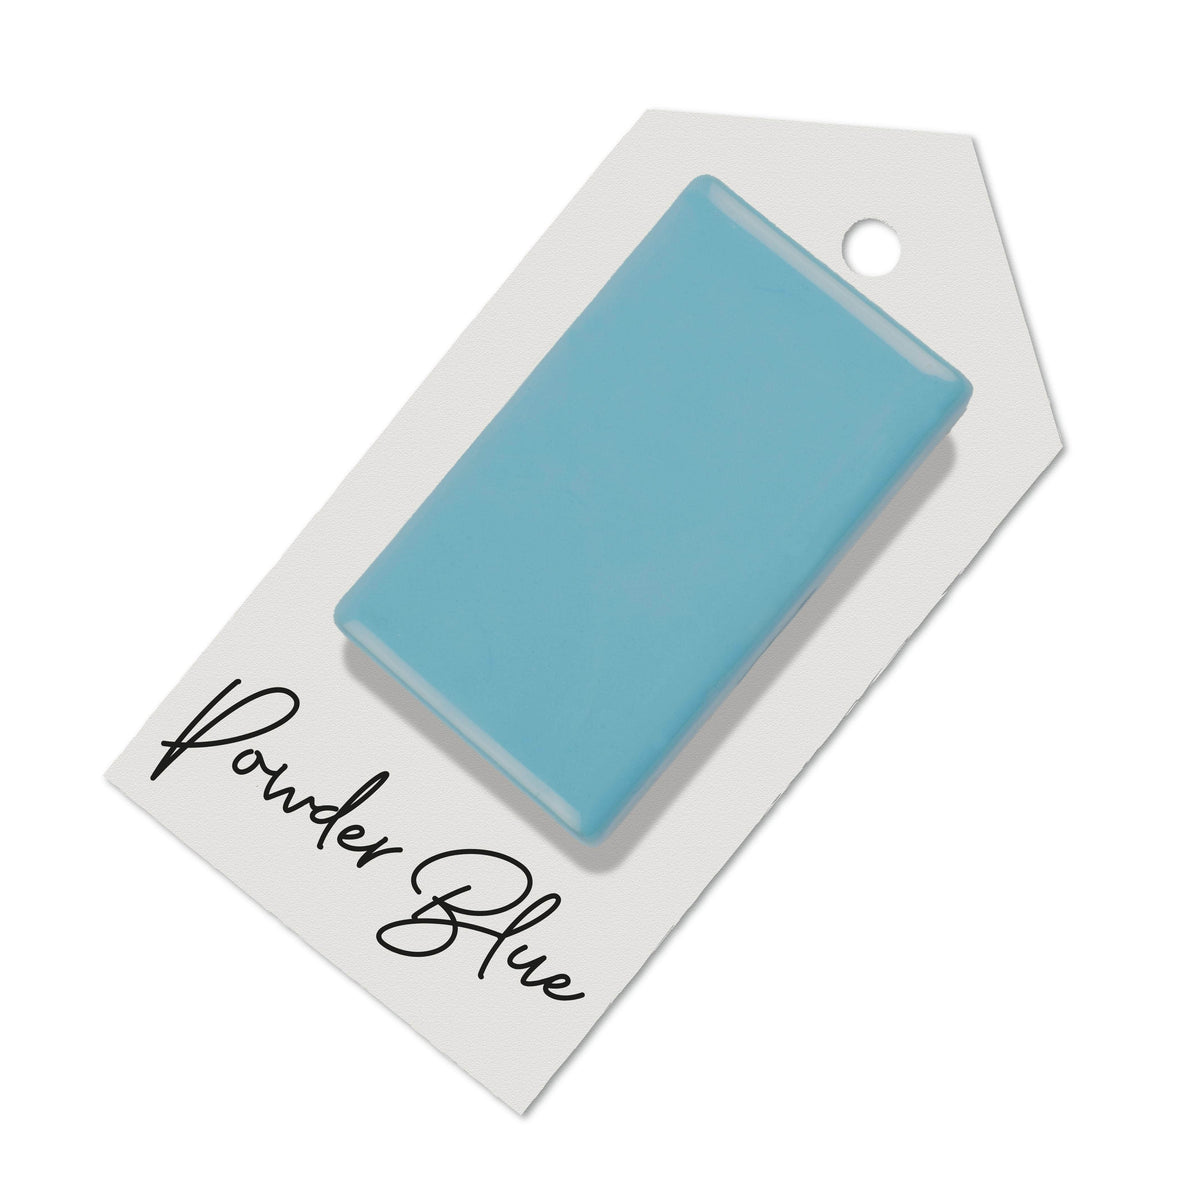 Powder Blue sample for Aga range cooker re-enamelling &amp; reconditioned cookers